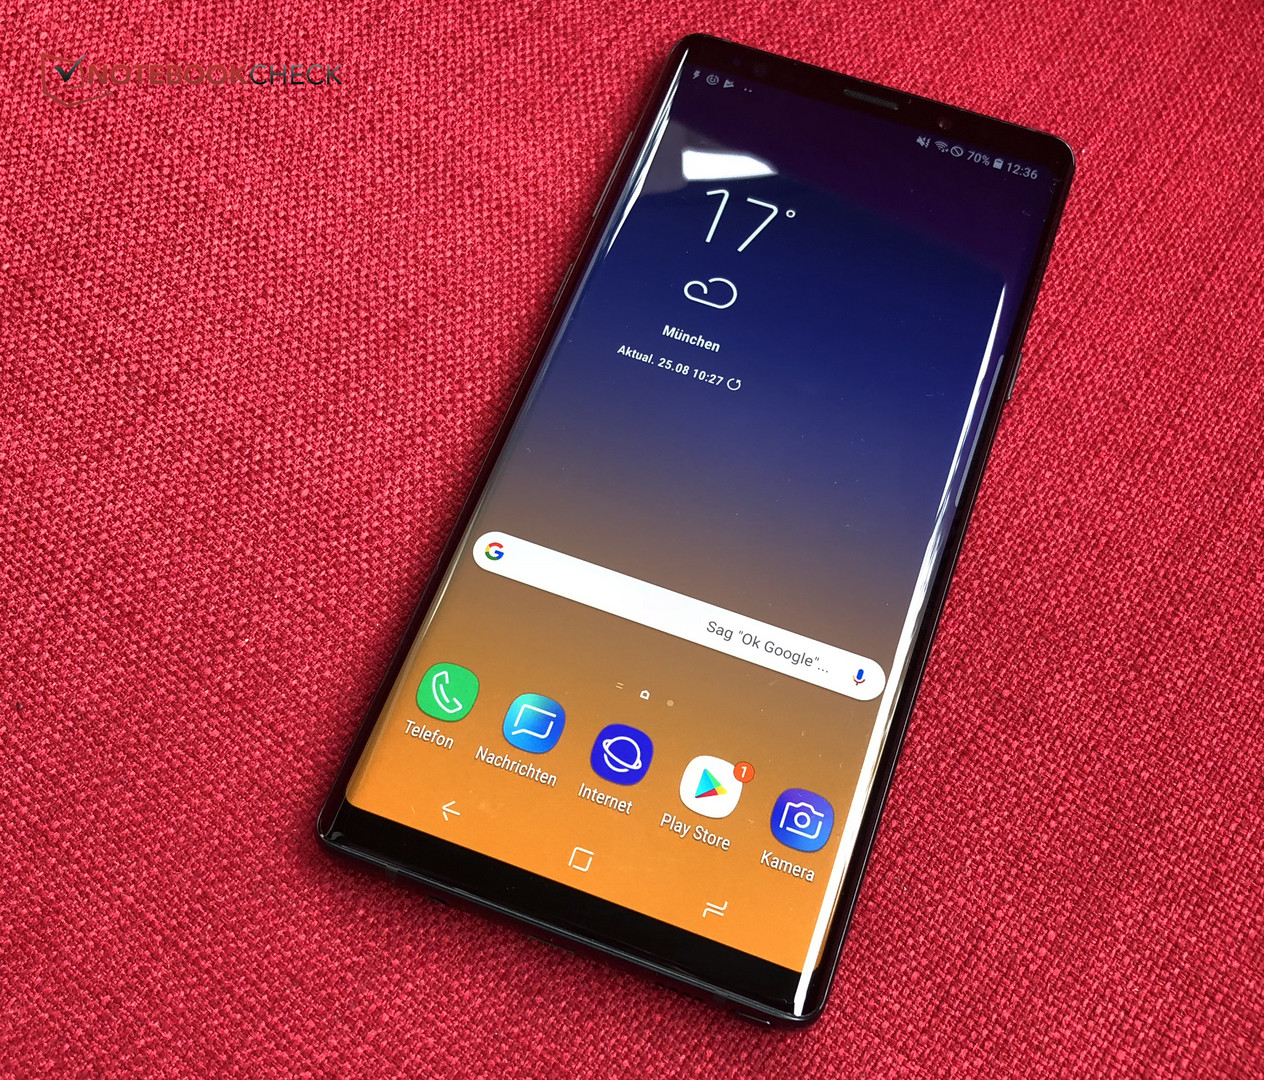 Samsung Galaxy Note9 Full Phone Specifications